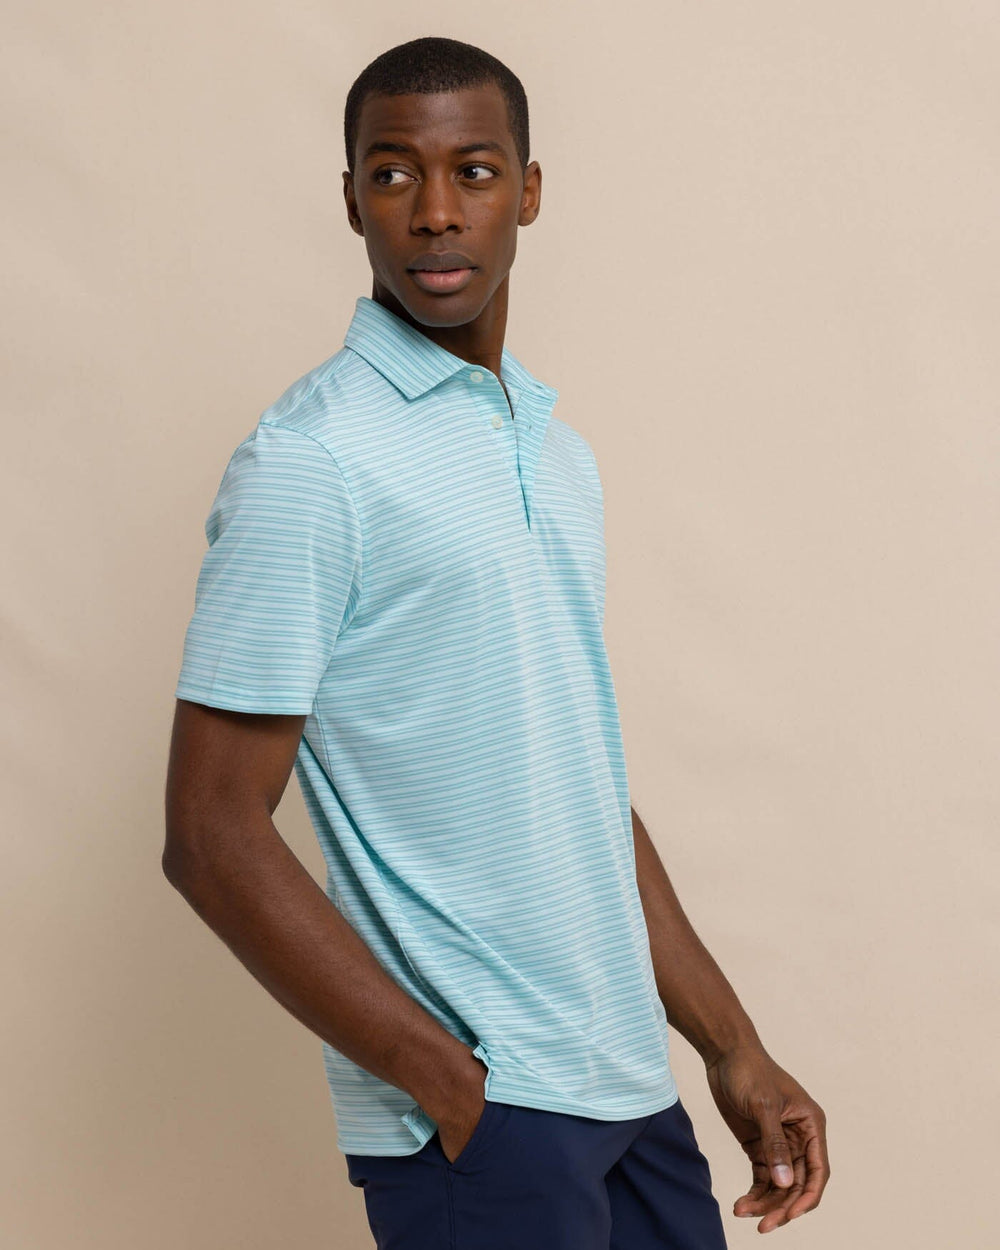 The front view of the Southern Tide Driver Baywoods Stripe Polo by Southern Tide - Wake Blue